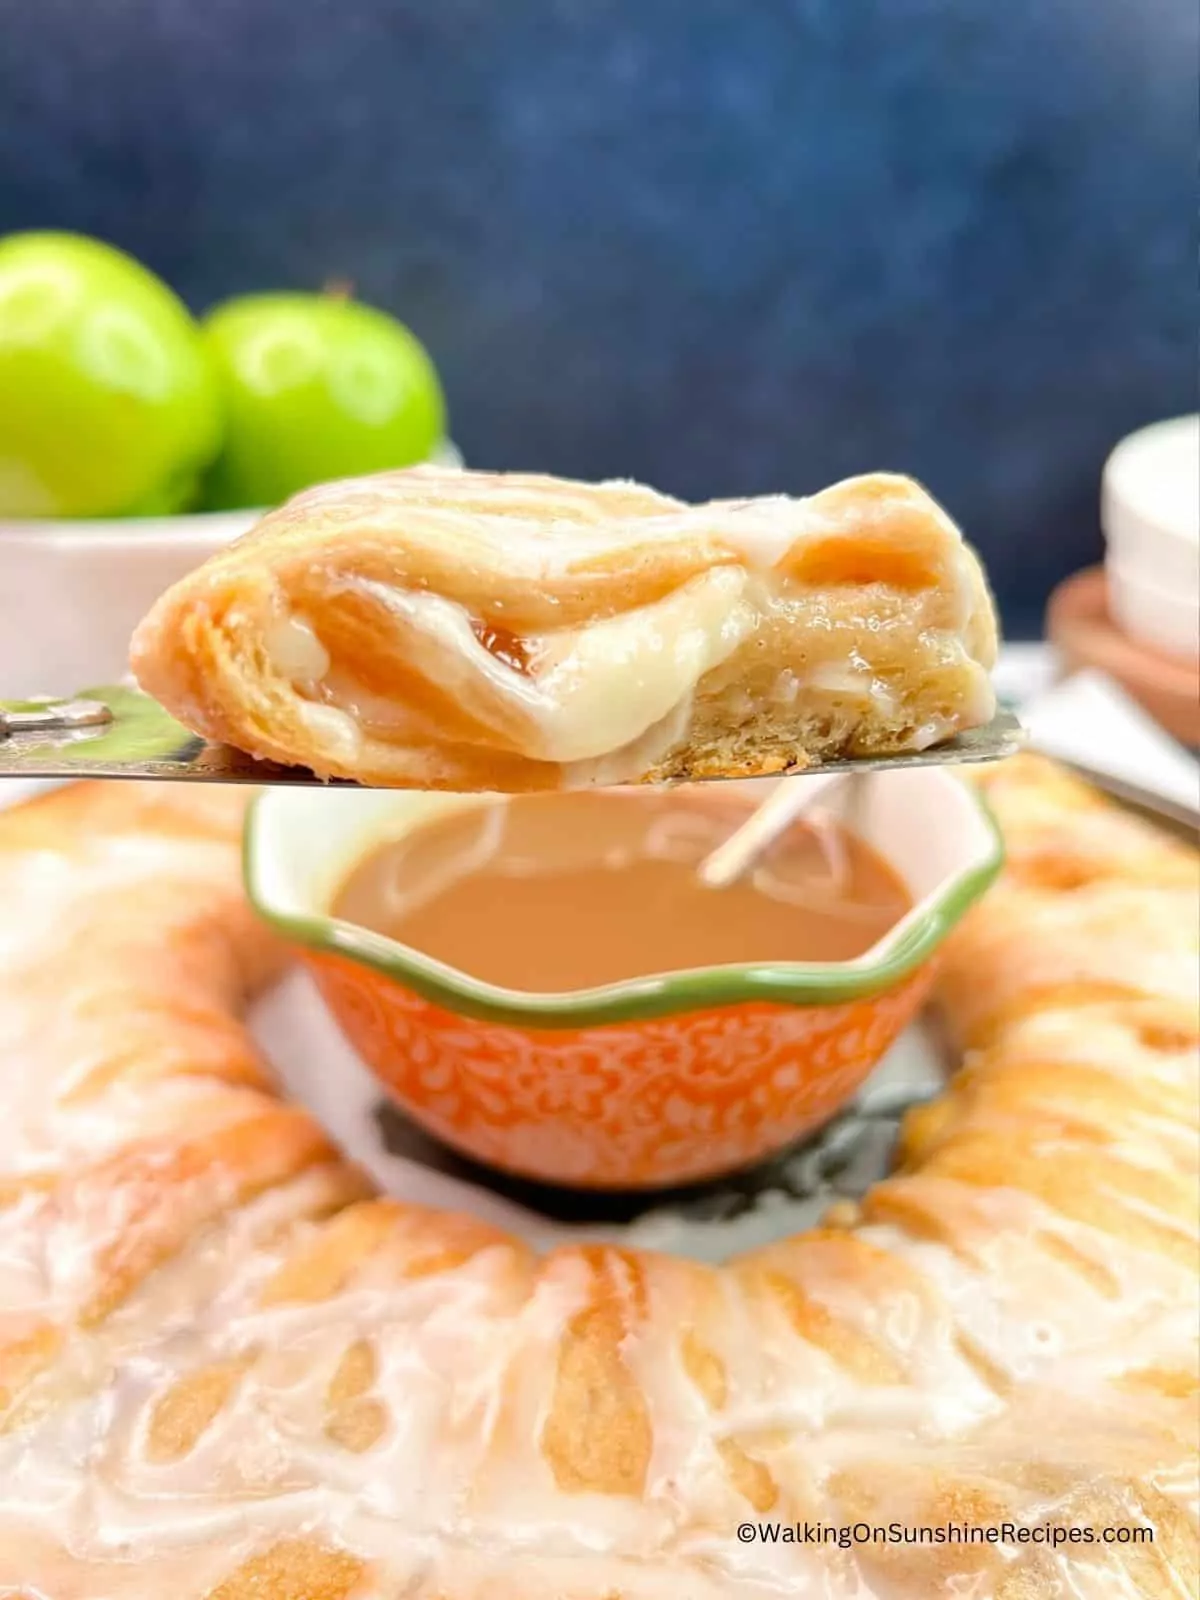 Slice of crescent rolls with apple pie filling on serving spatula.